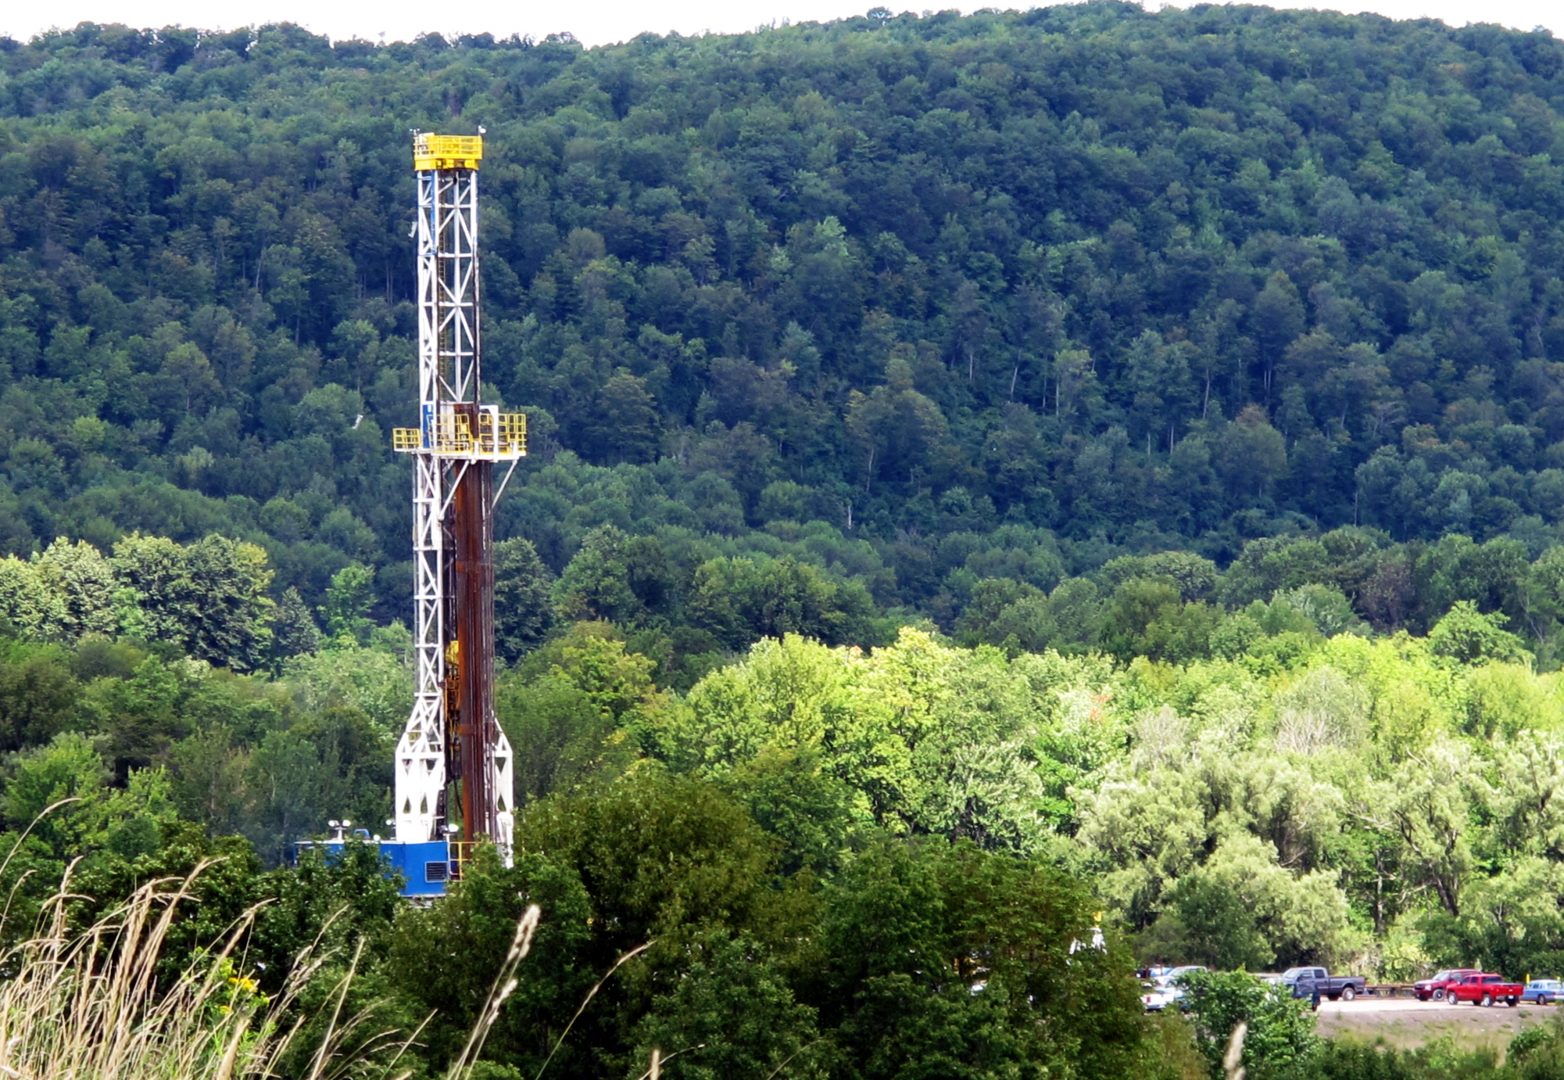 A drilling rig in the Tioga Staet Forest